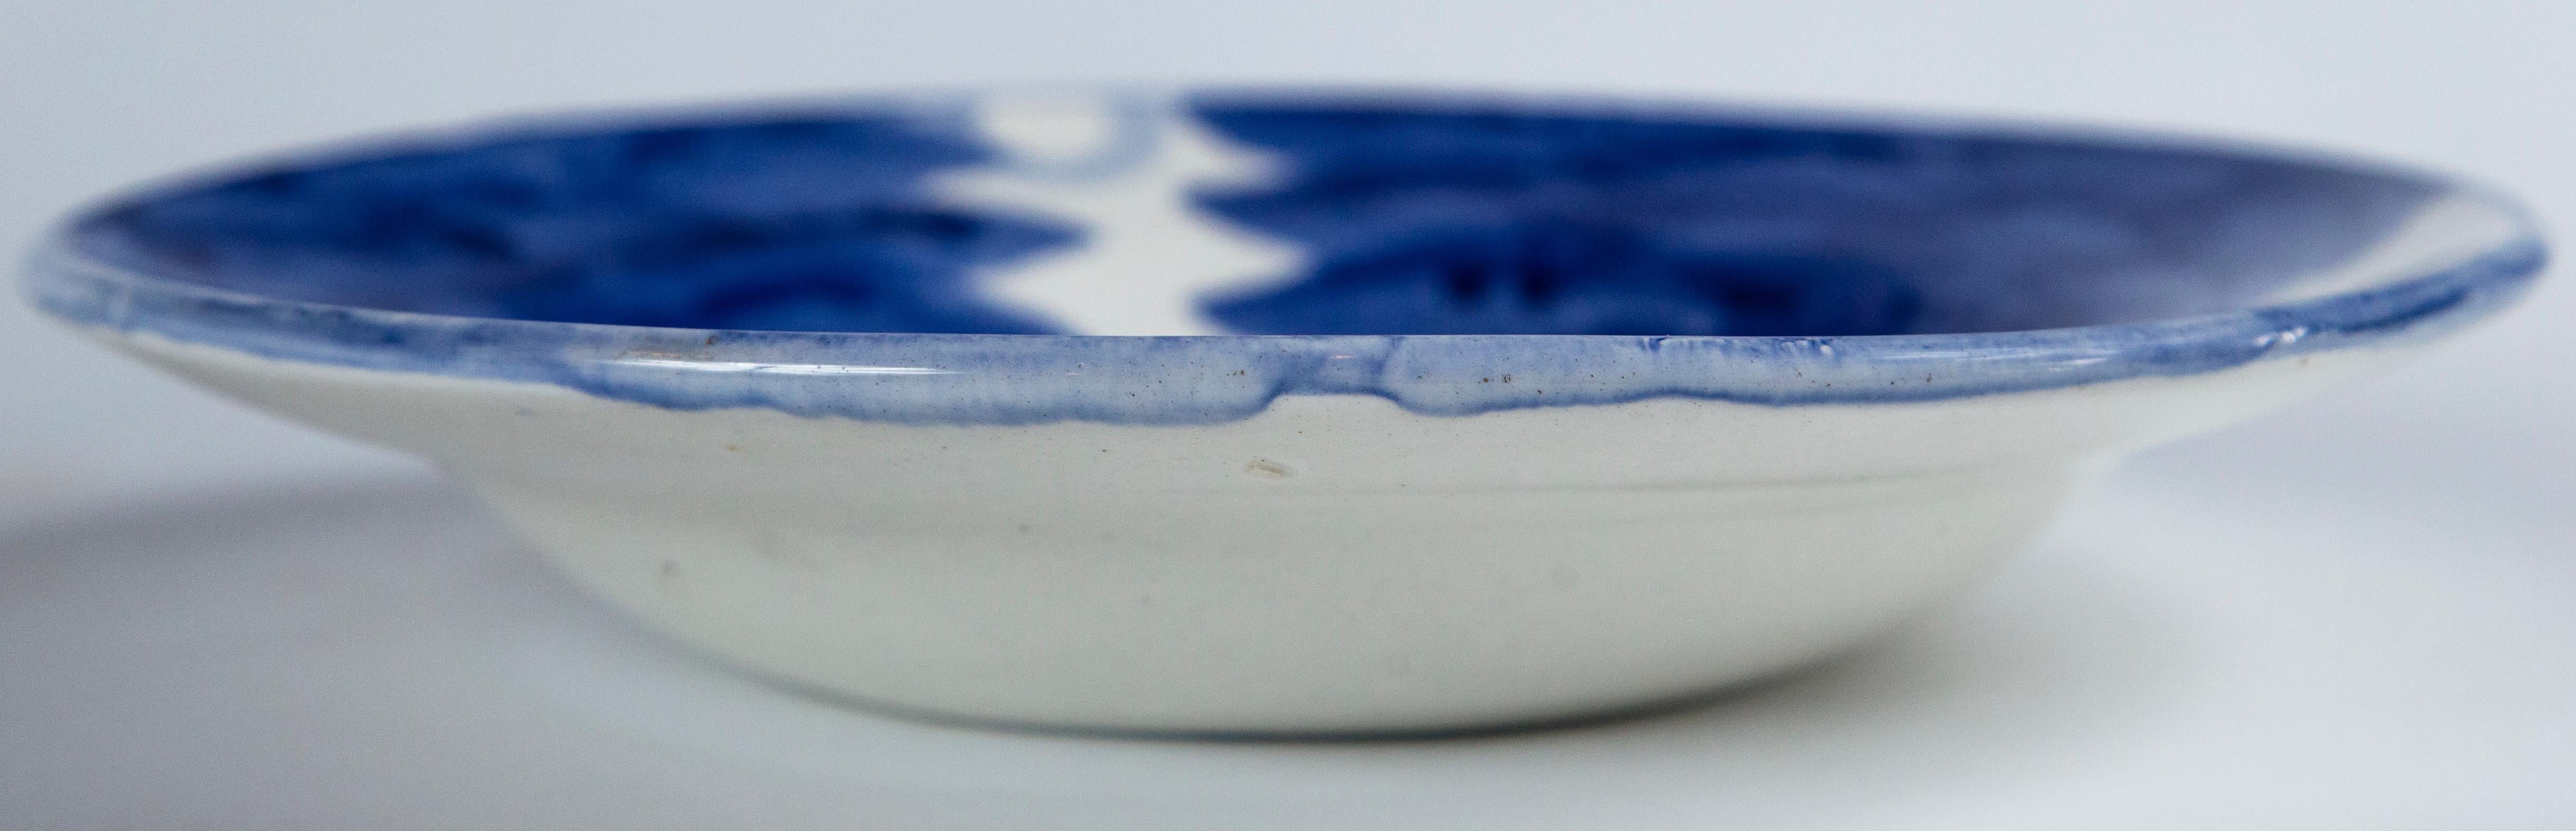 Pair of Hand Painted Blue and White Ceramic Bowls, Europe, Mid-20th Century 3